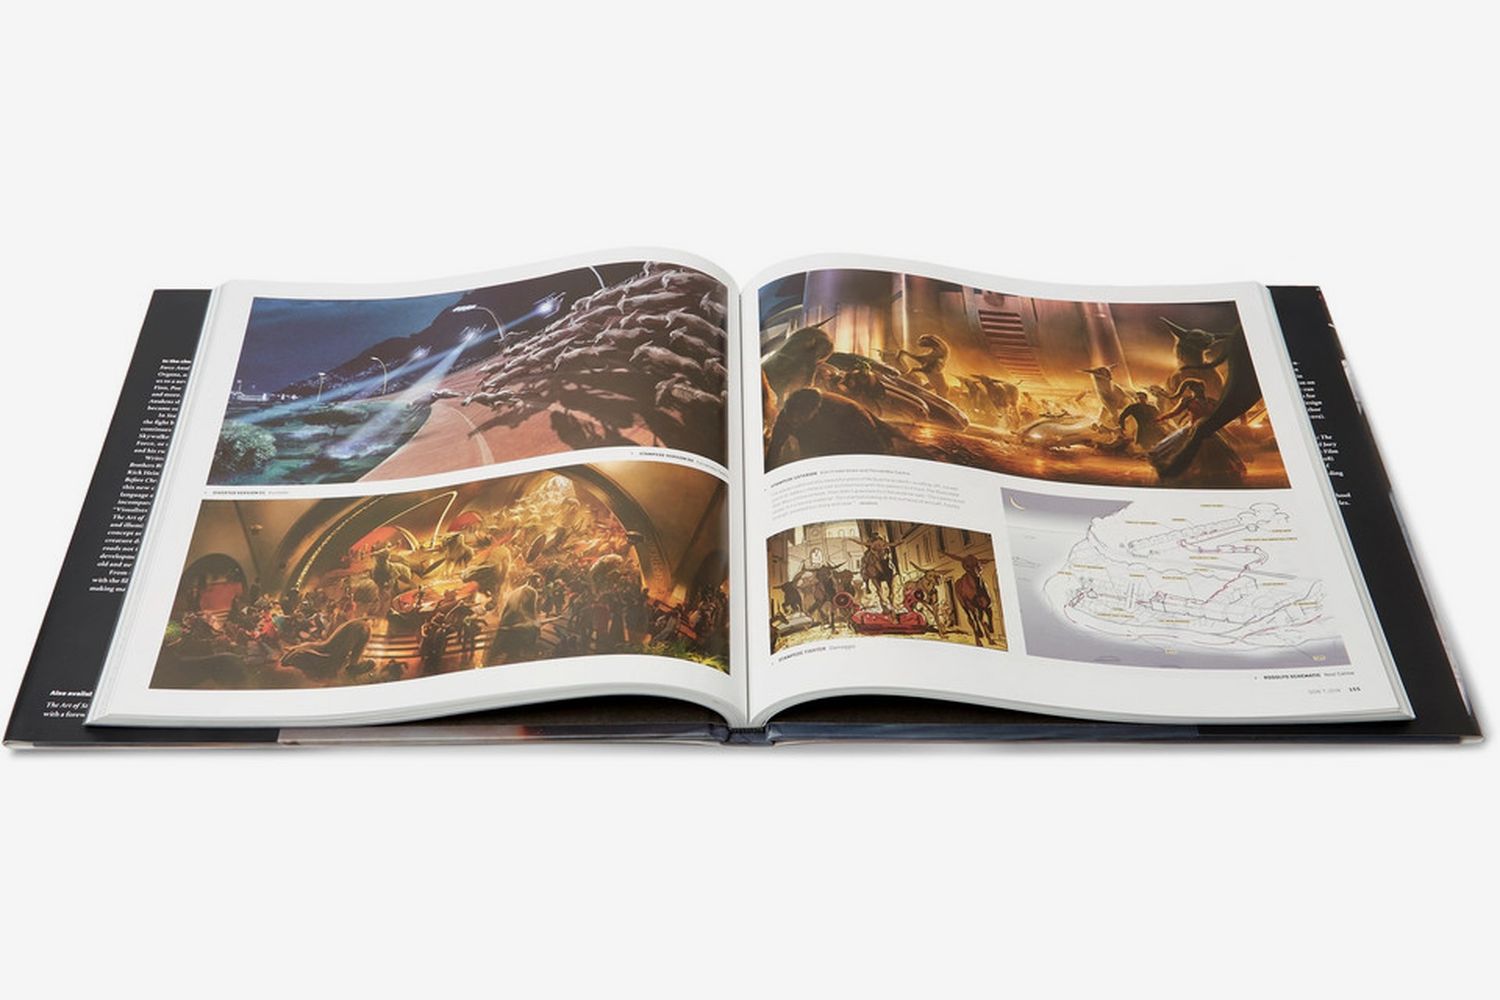 The Art Of Star Wars: The Last Jedi Hardcover Book